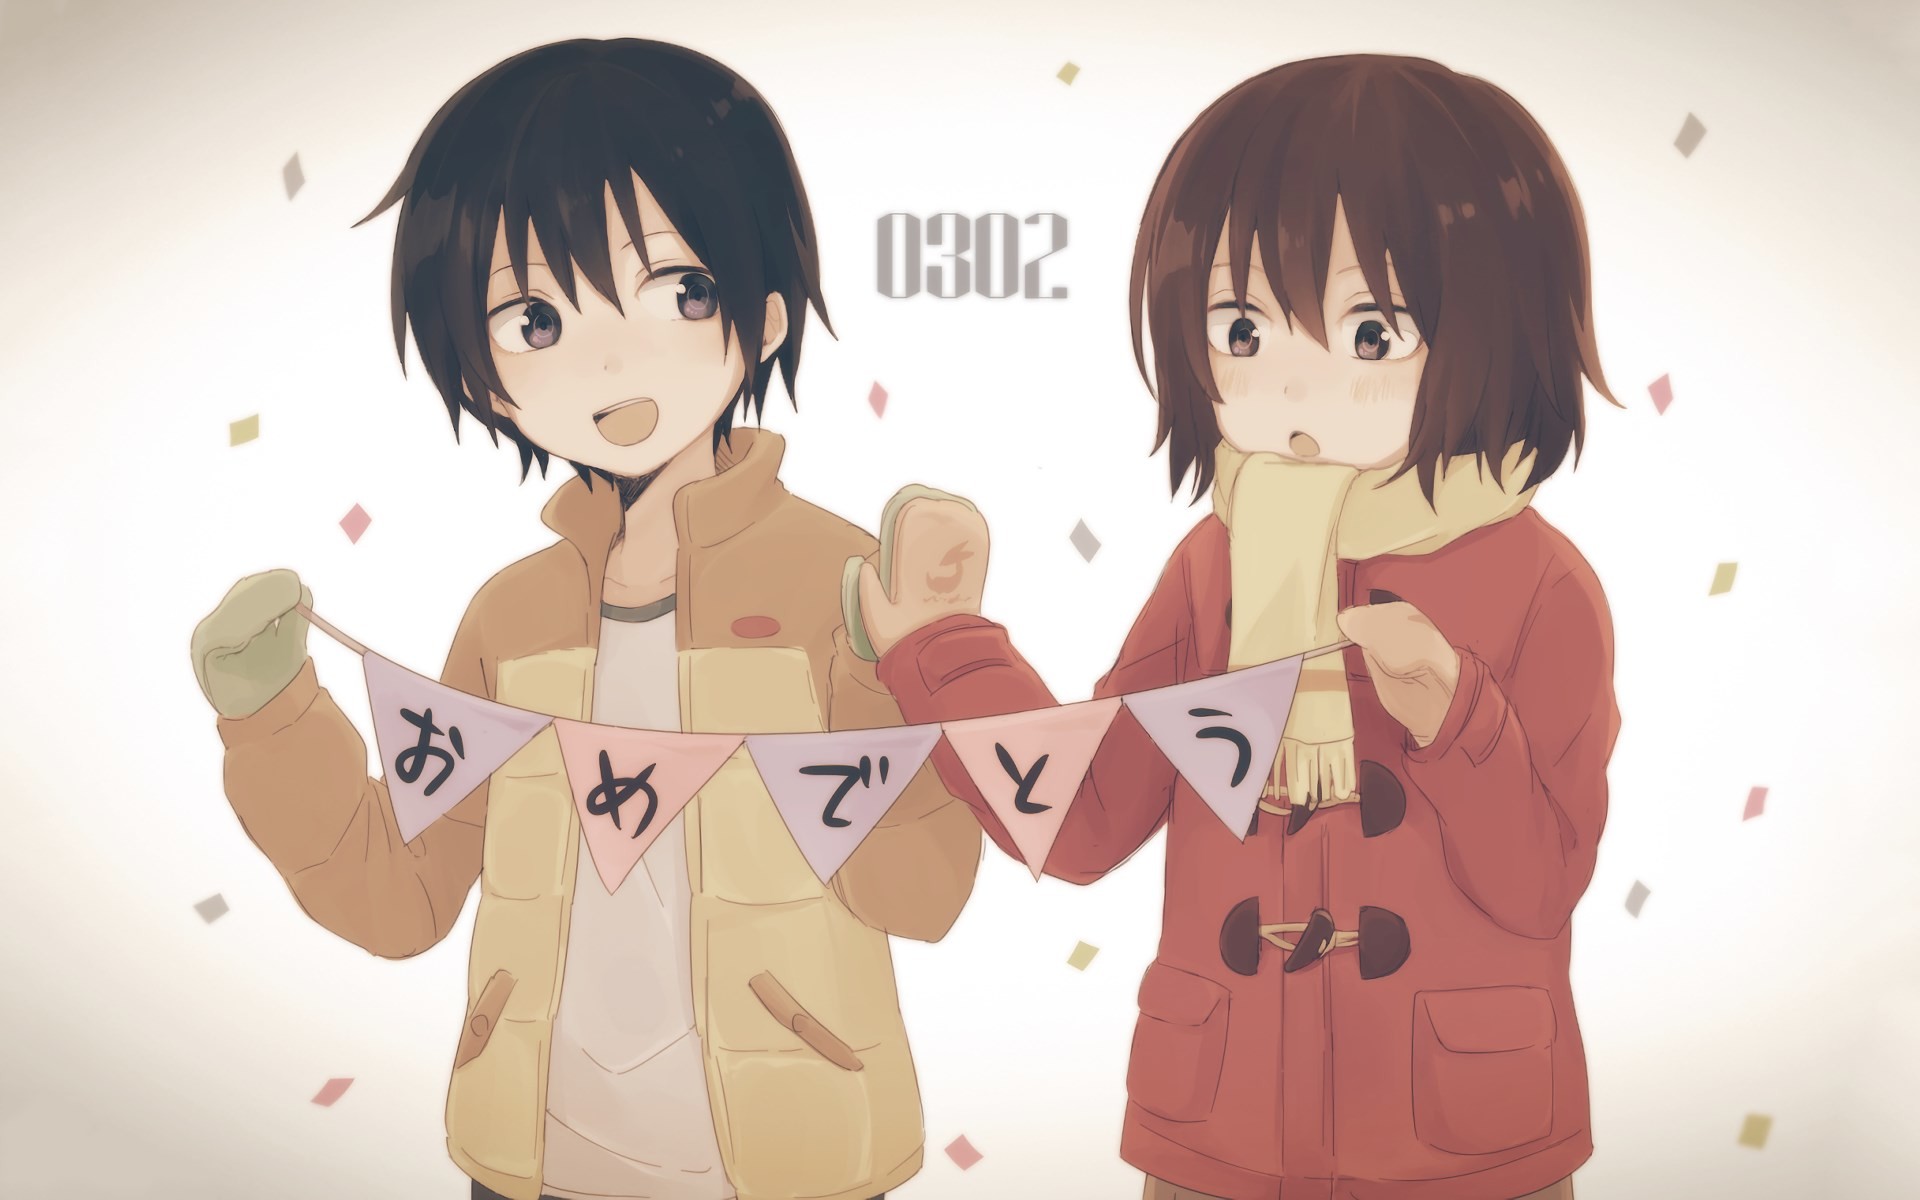 1920x1200 free wallpaper and screensavers for erased - erased category